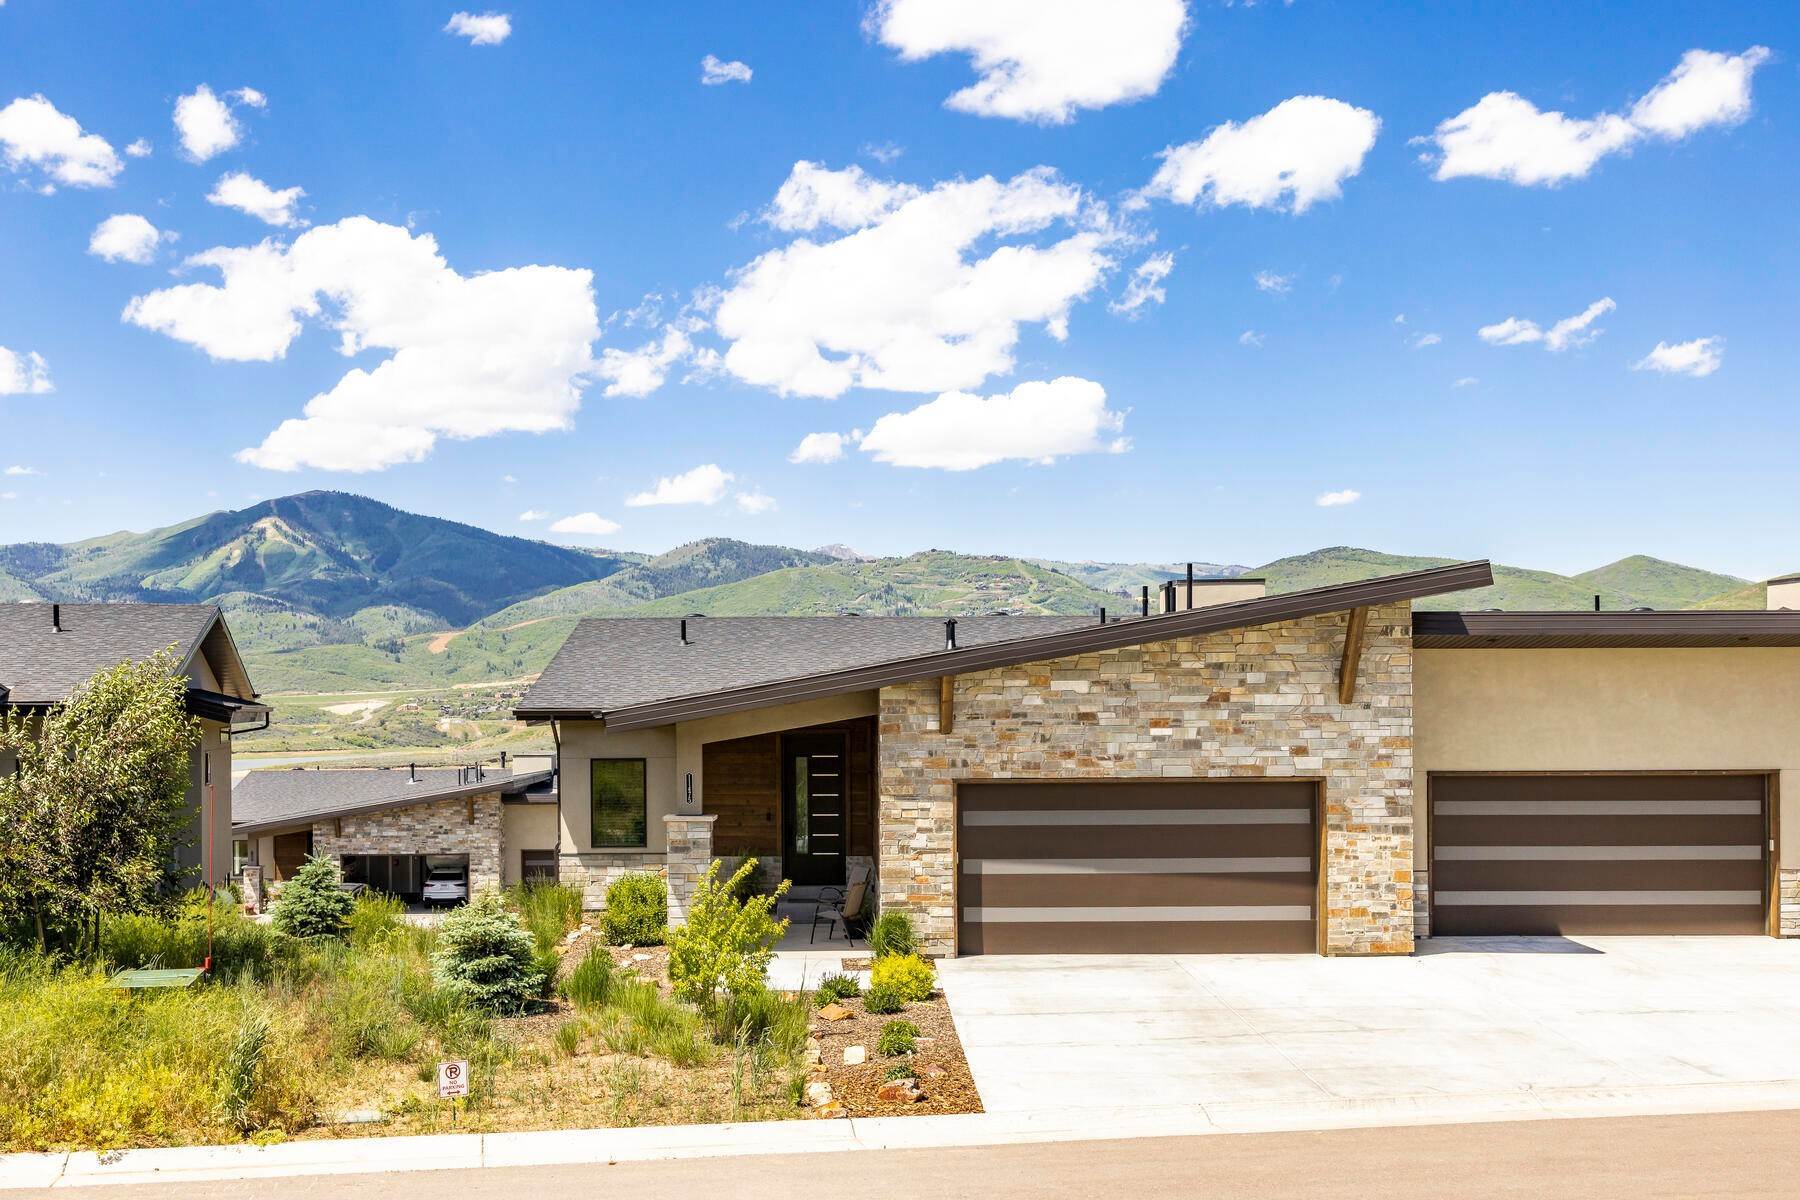 Townhouse for Sale at Beautifully Upgraded Shoreline Village Townhome with Stunning Ski Run Views 11475 N Perspective Dr, Unit #37 Hideout Canyon, Utah 84036 United States